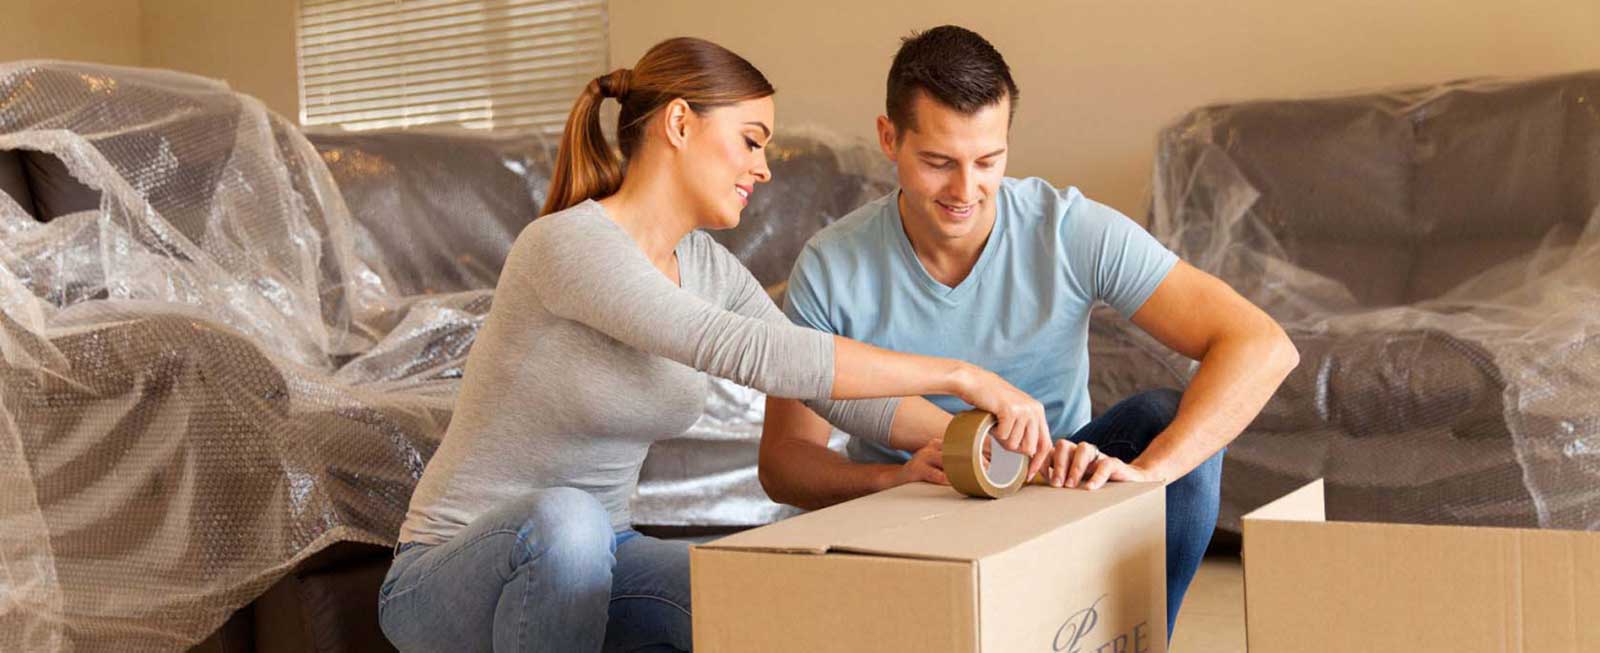 How to Find Best Removalists Online